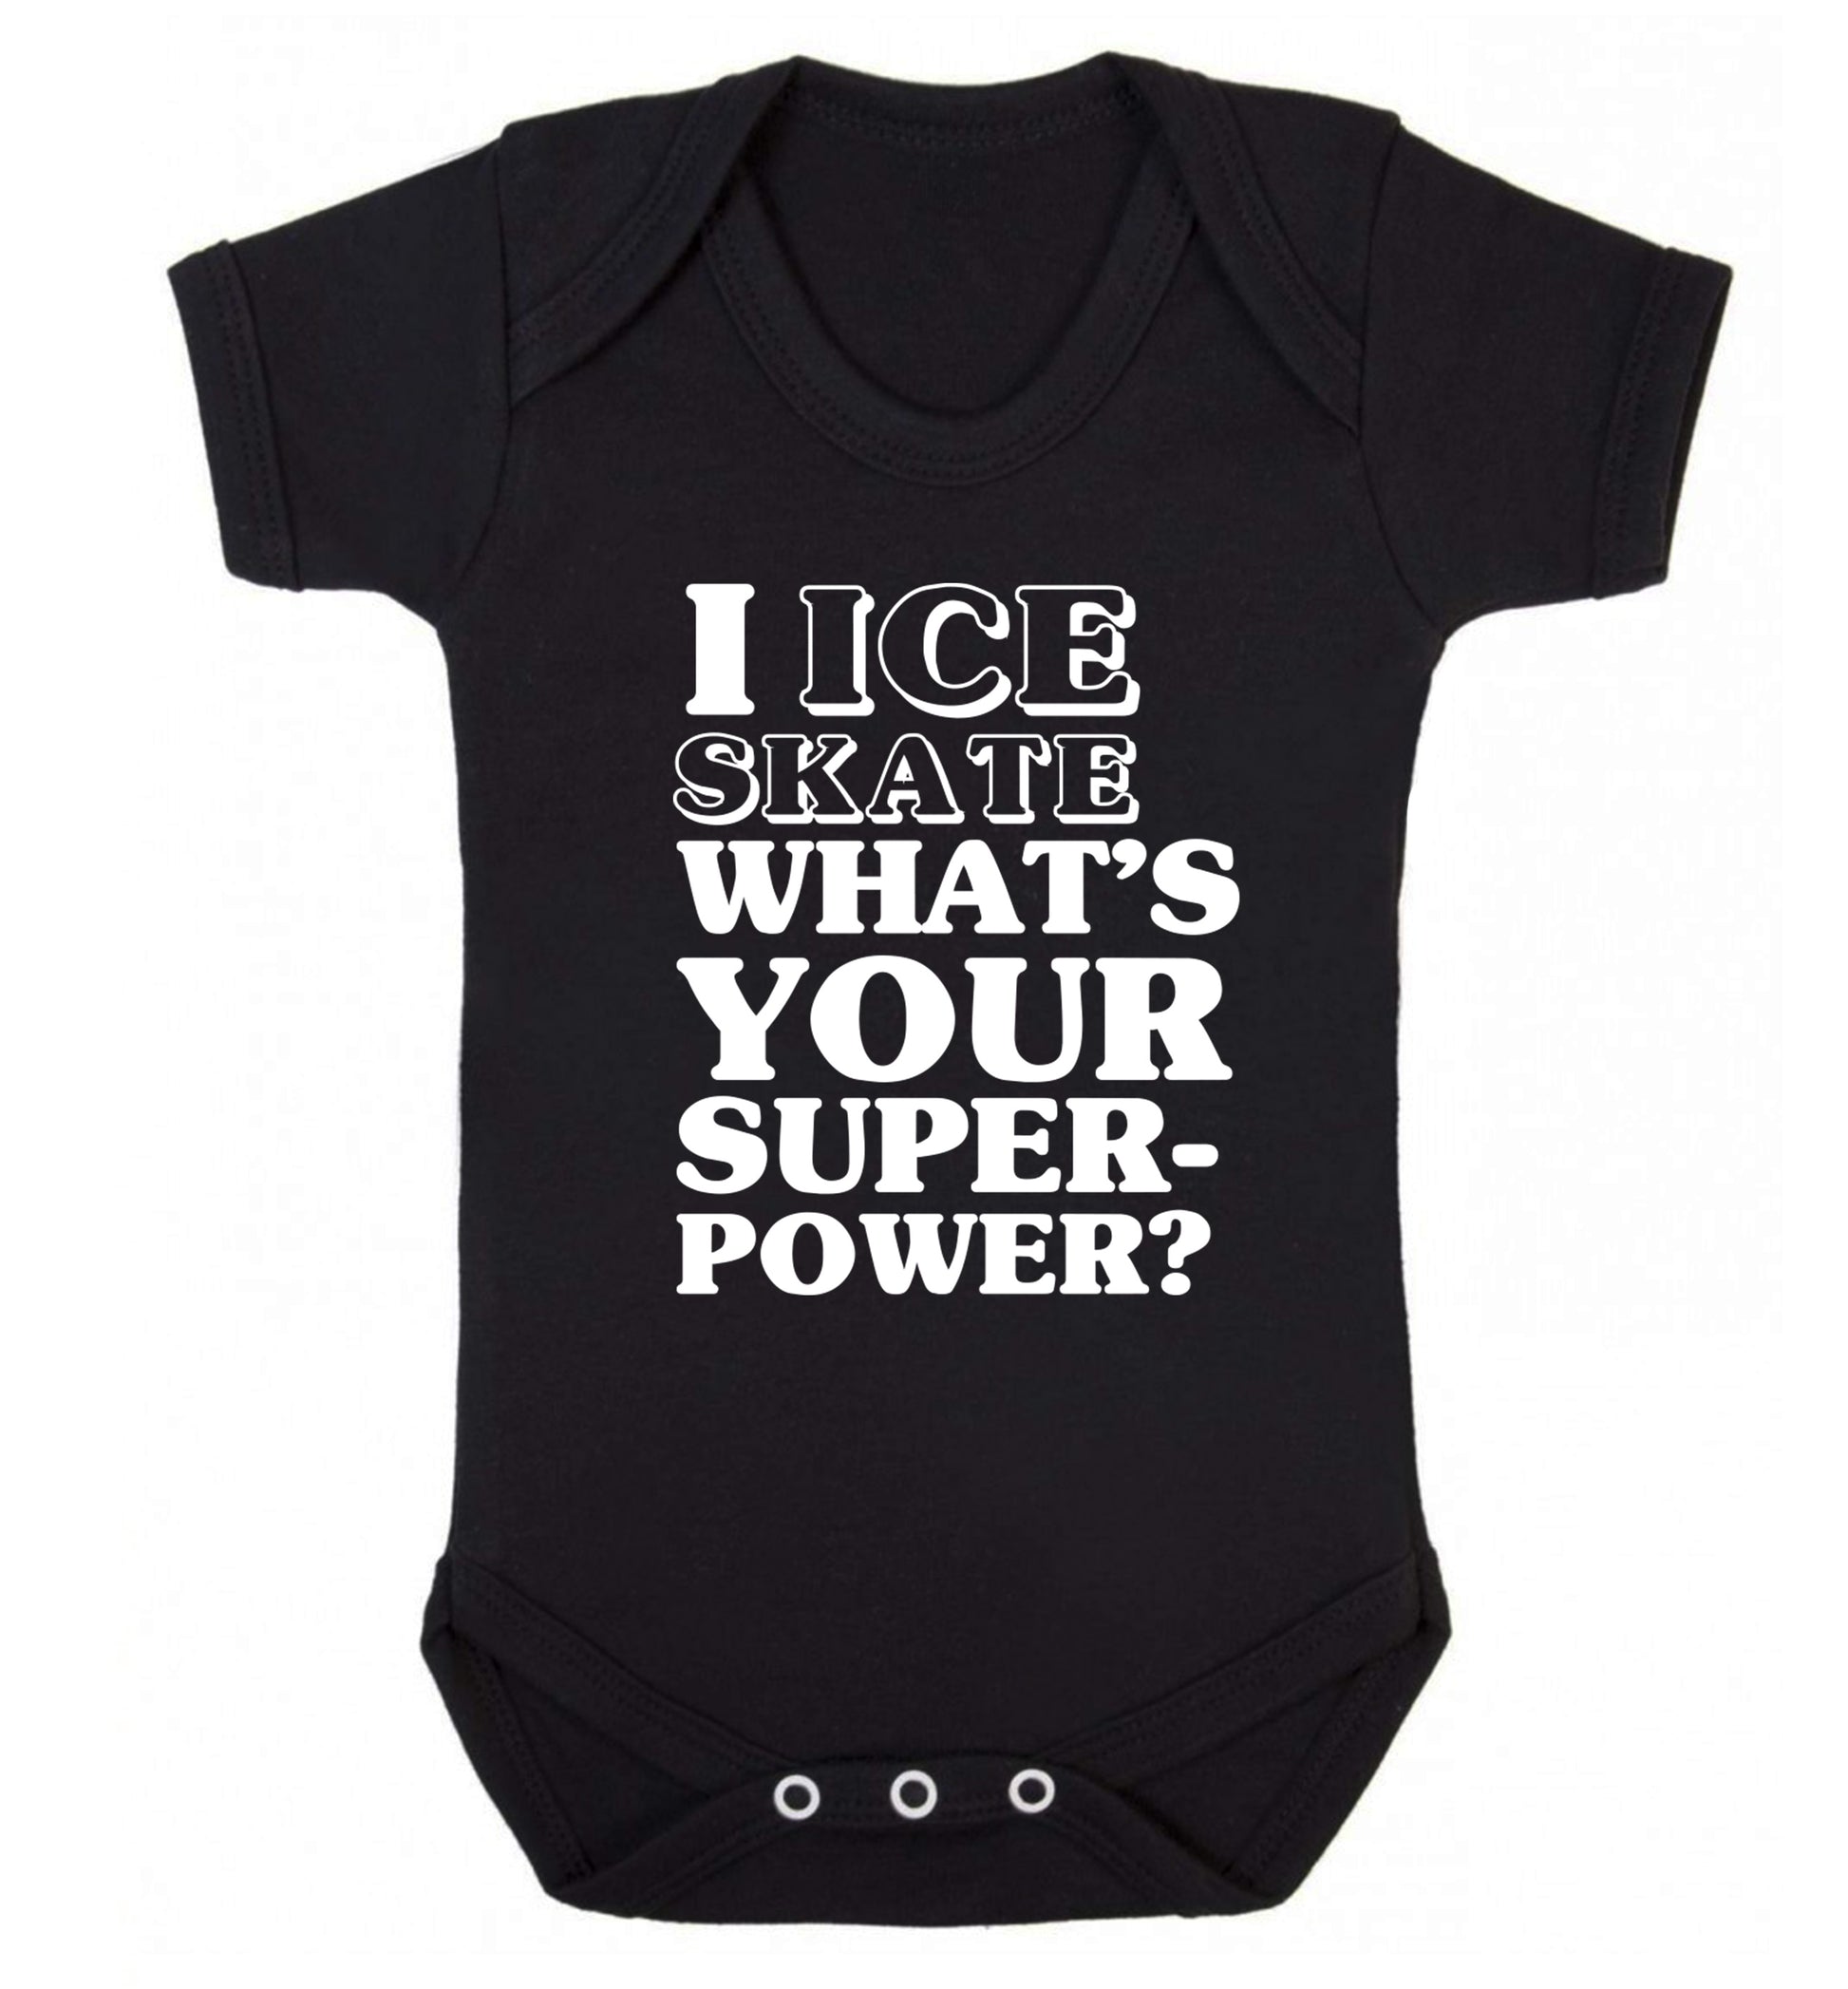 I ice skate what's your superpower? Baby Vest black 18-24 months